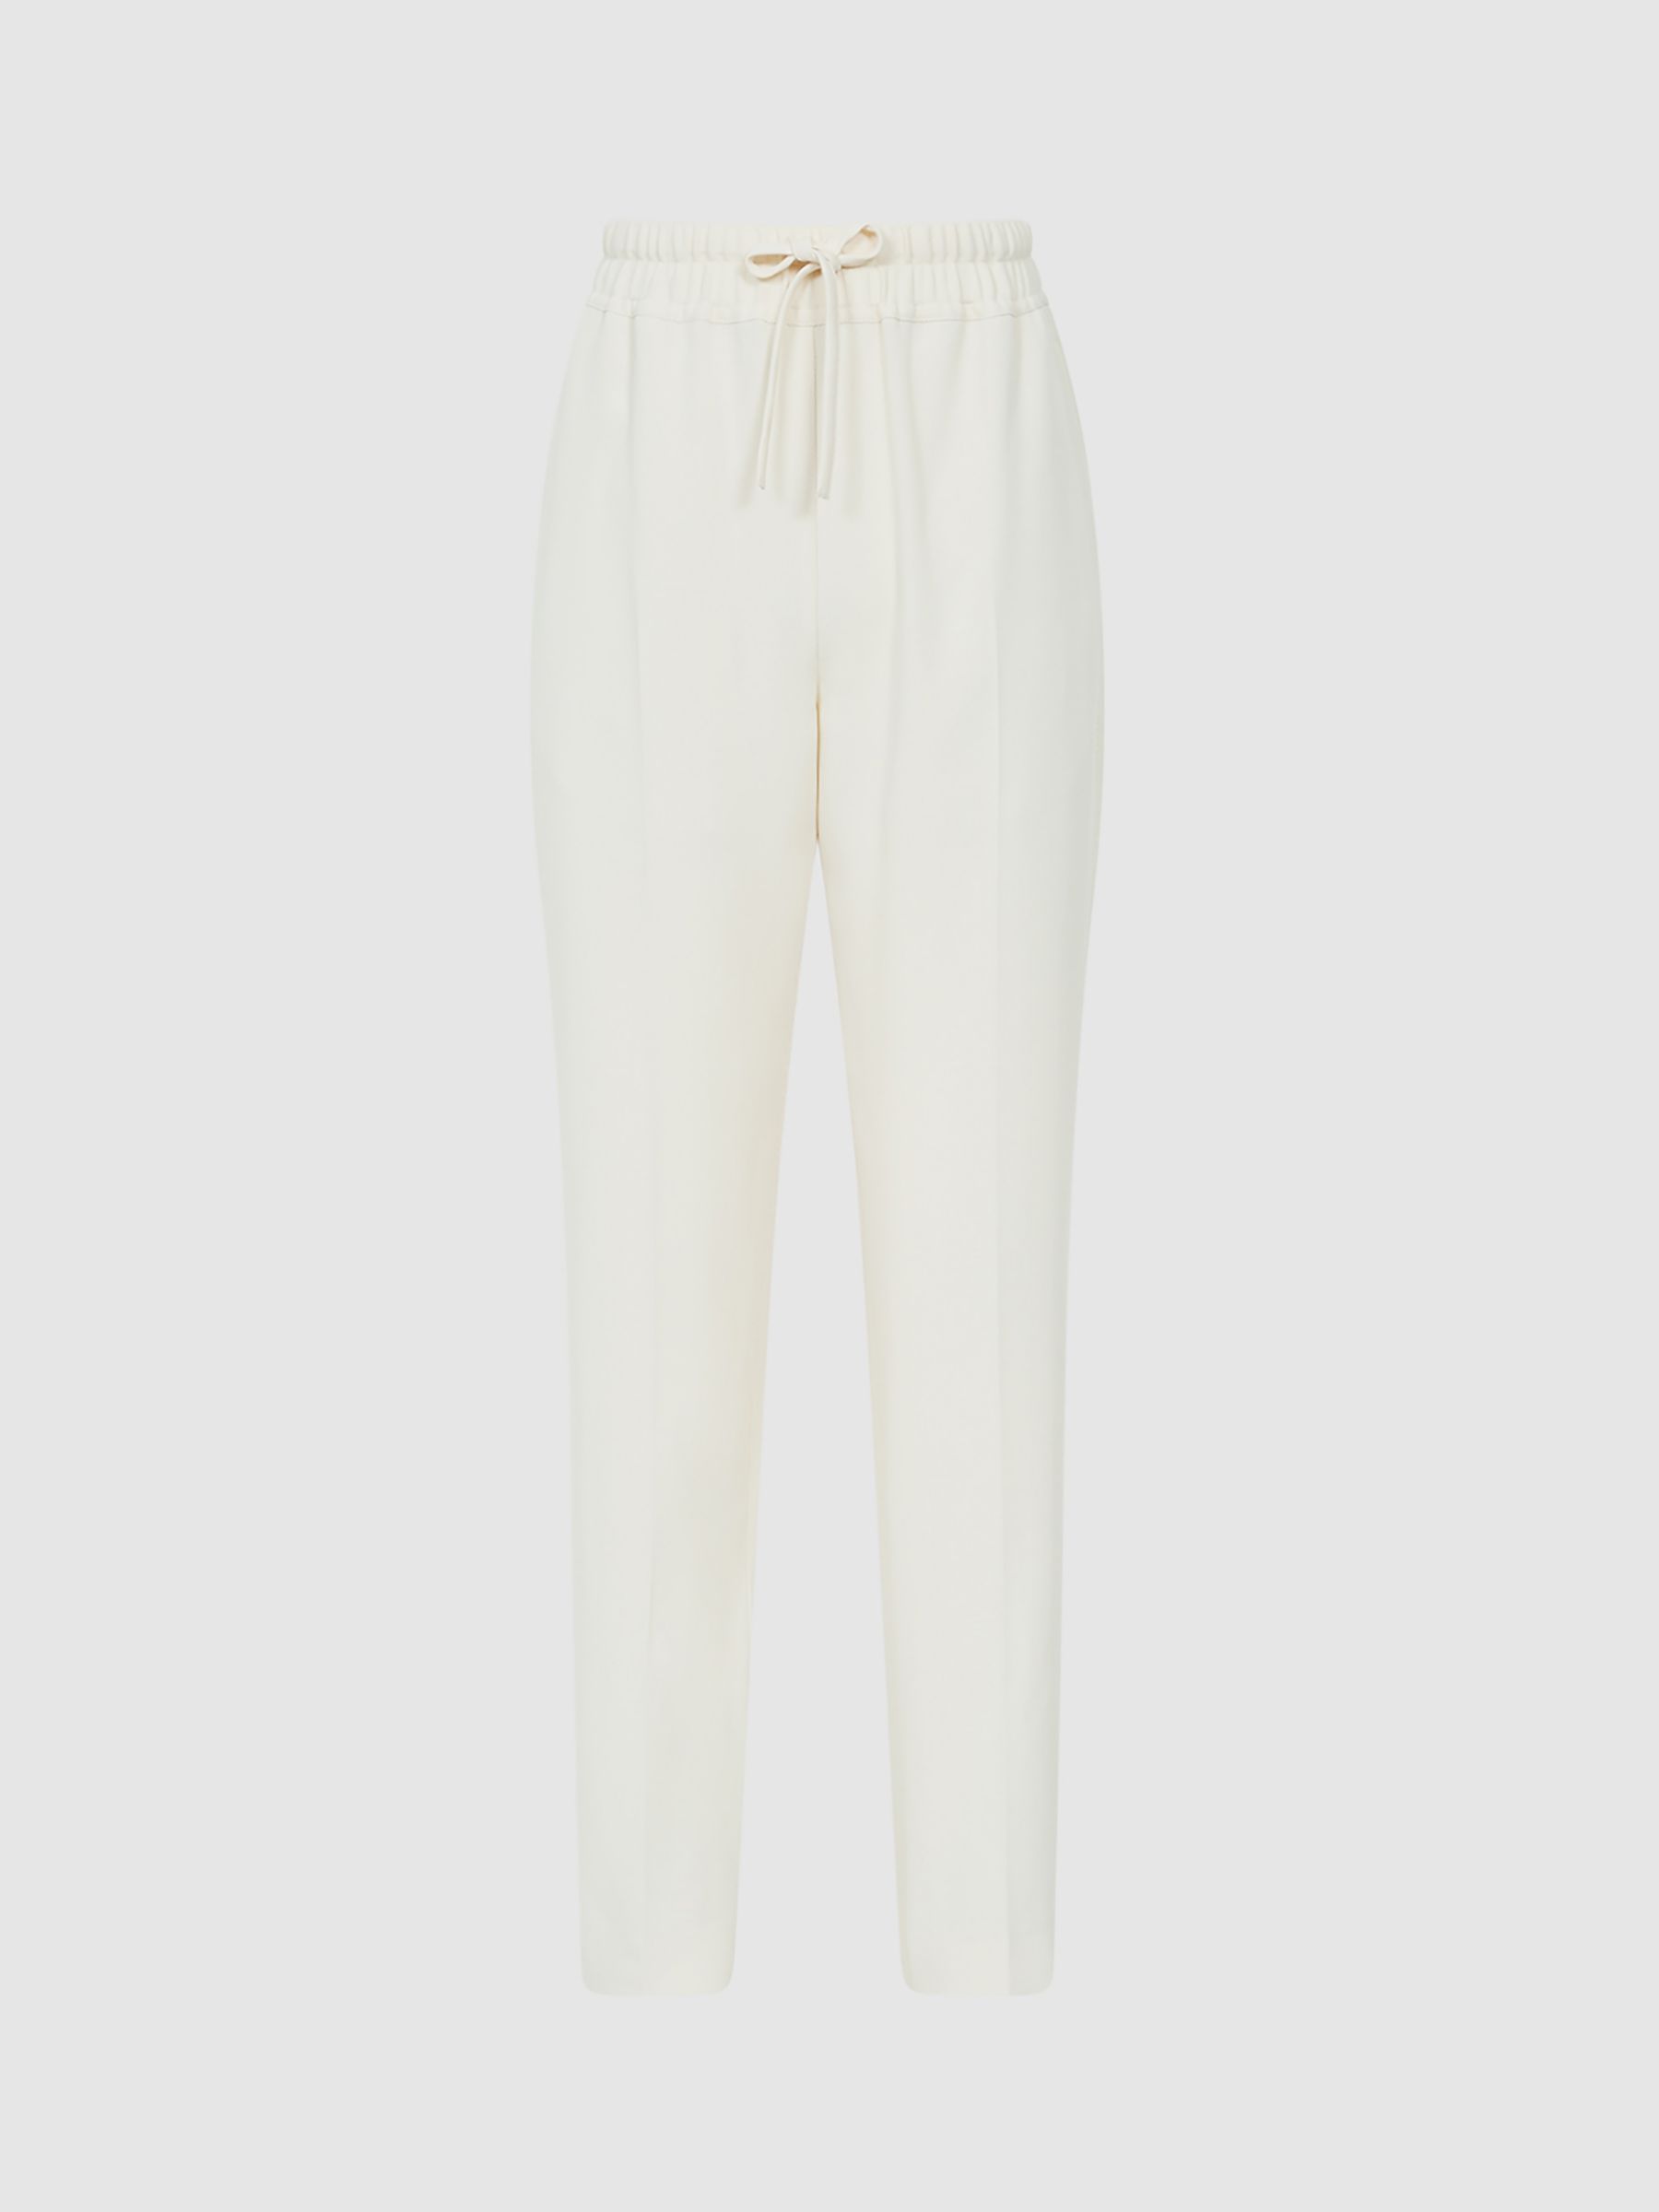 Reiss Hailey Pull On Trousers, Cream, 6